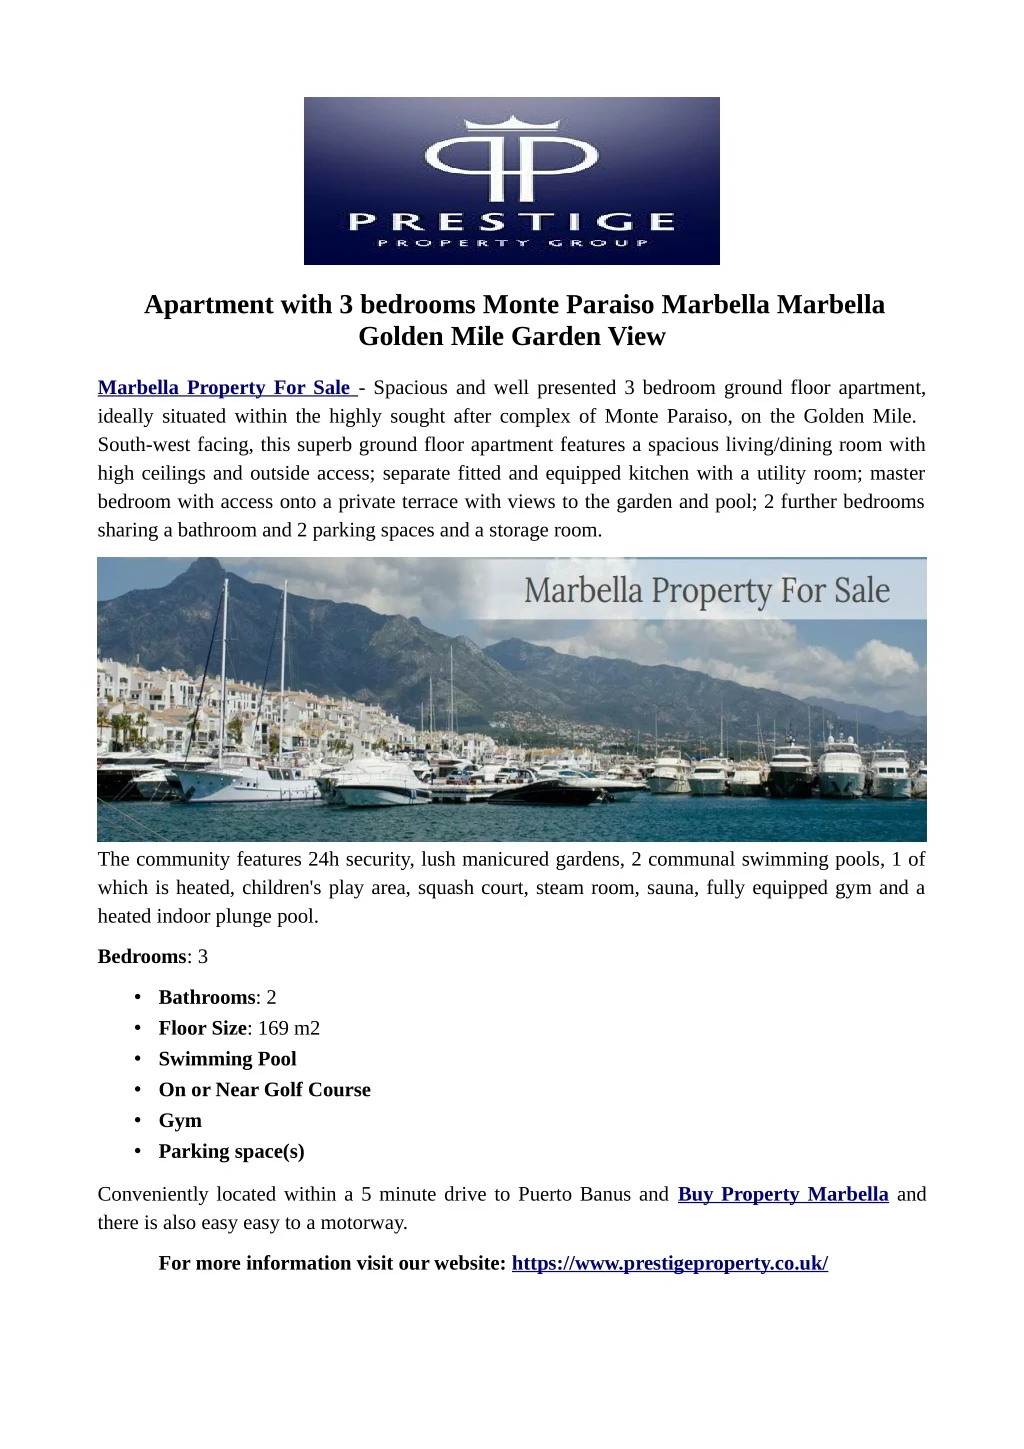 apartment with 3 bedrooms monte paraiso marbella